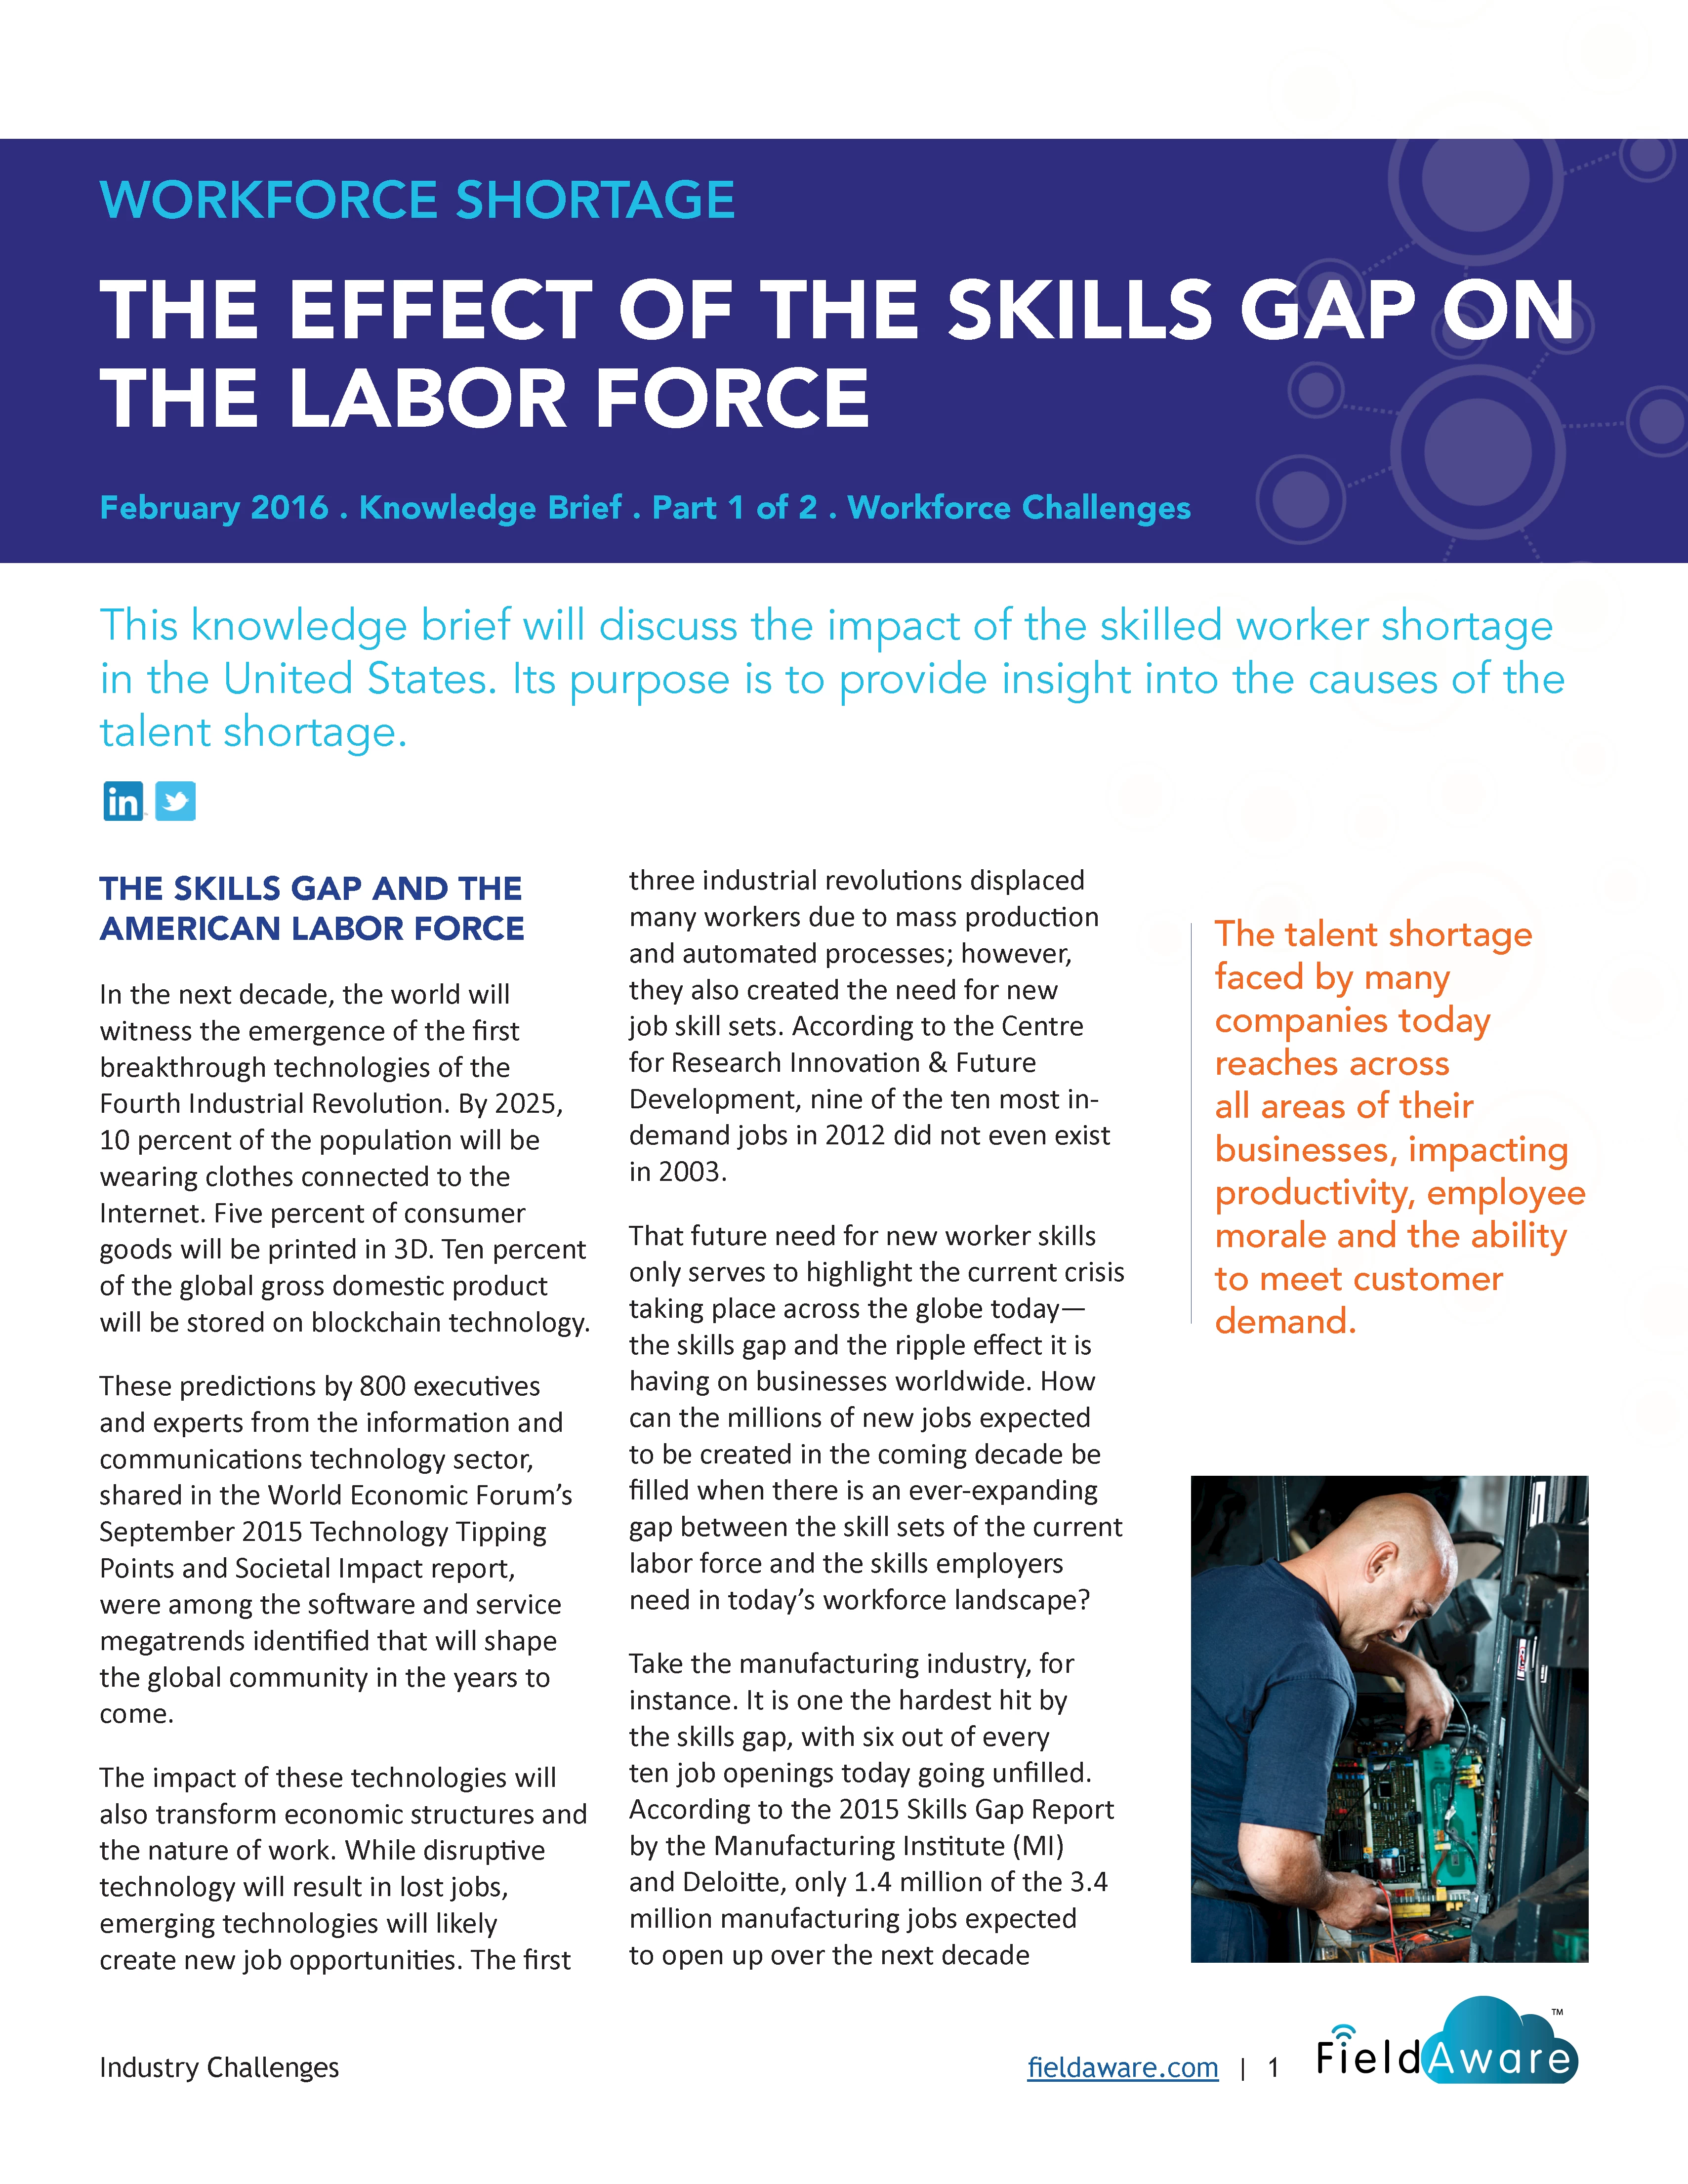 Workforce Shortage The Effect Of The Skills Gap On The Labor Force - Part 1 White Paper